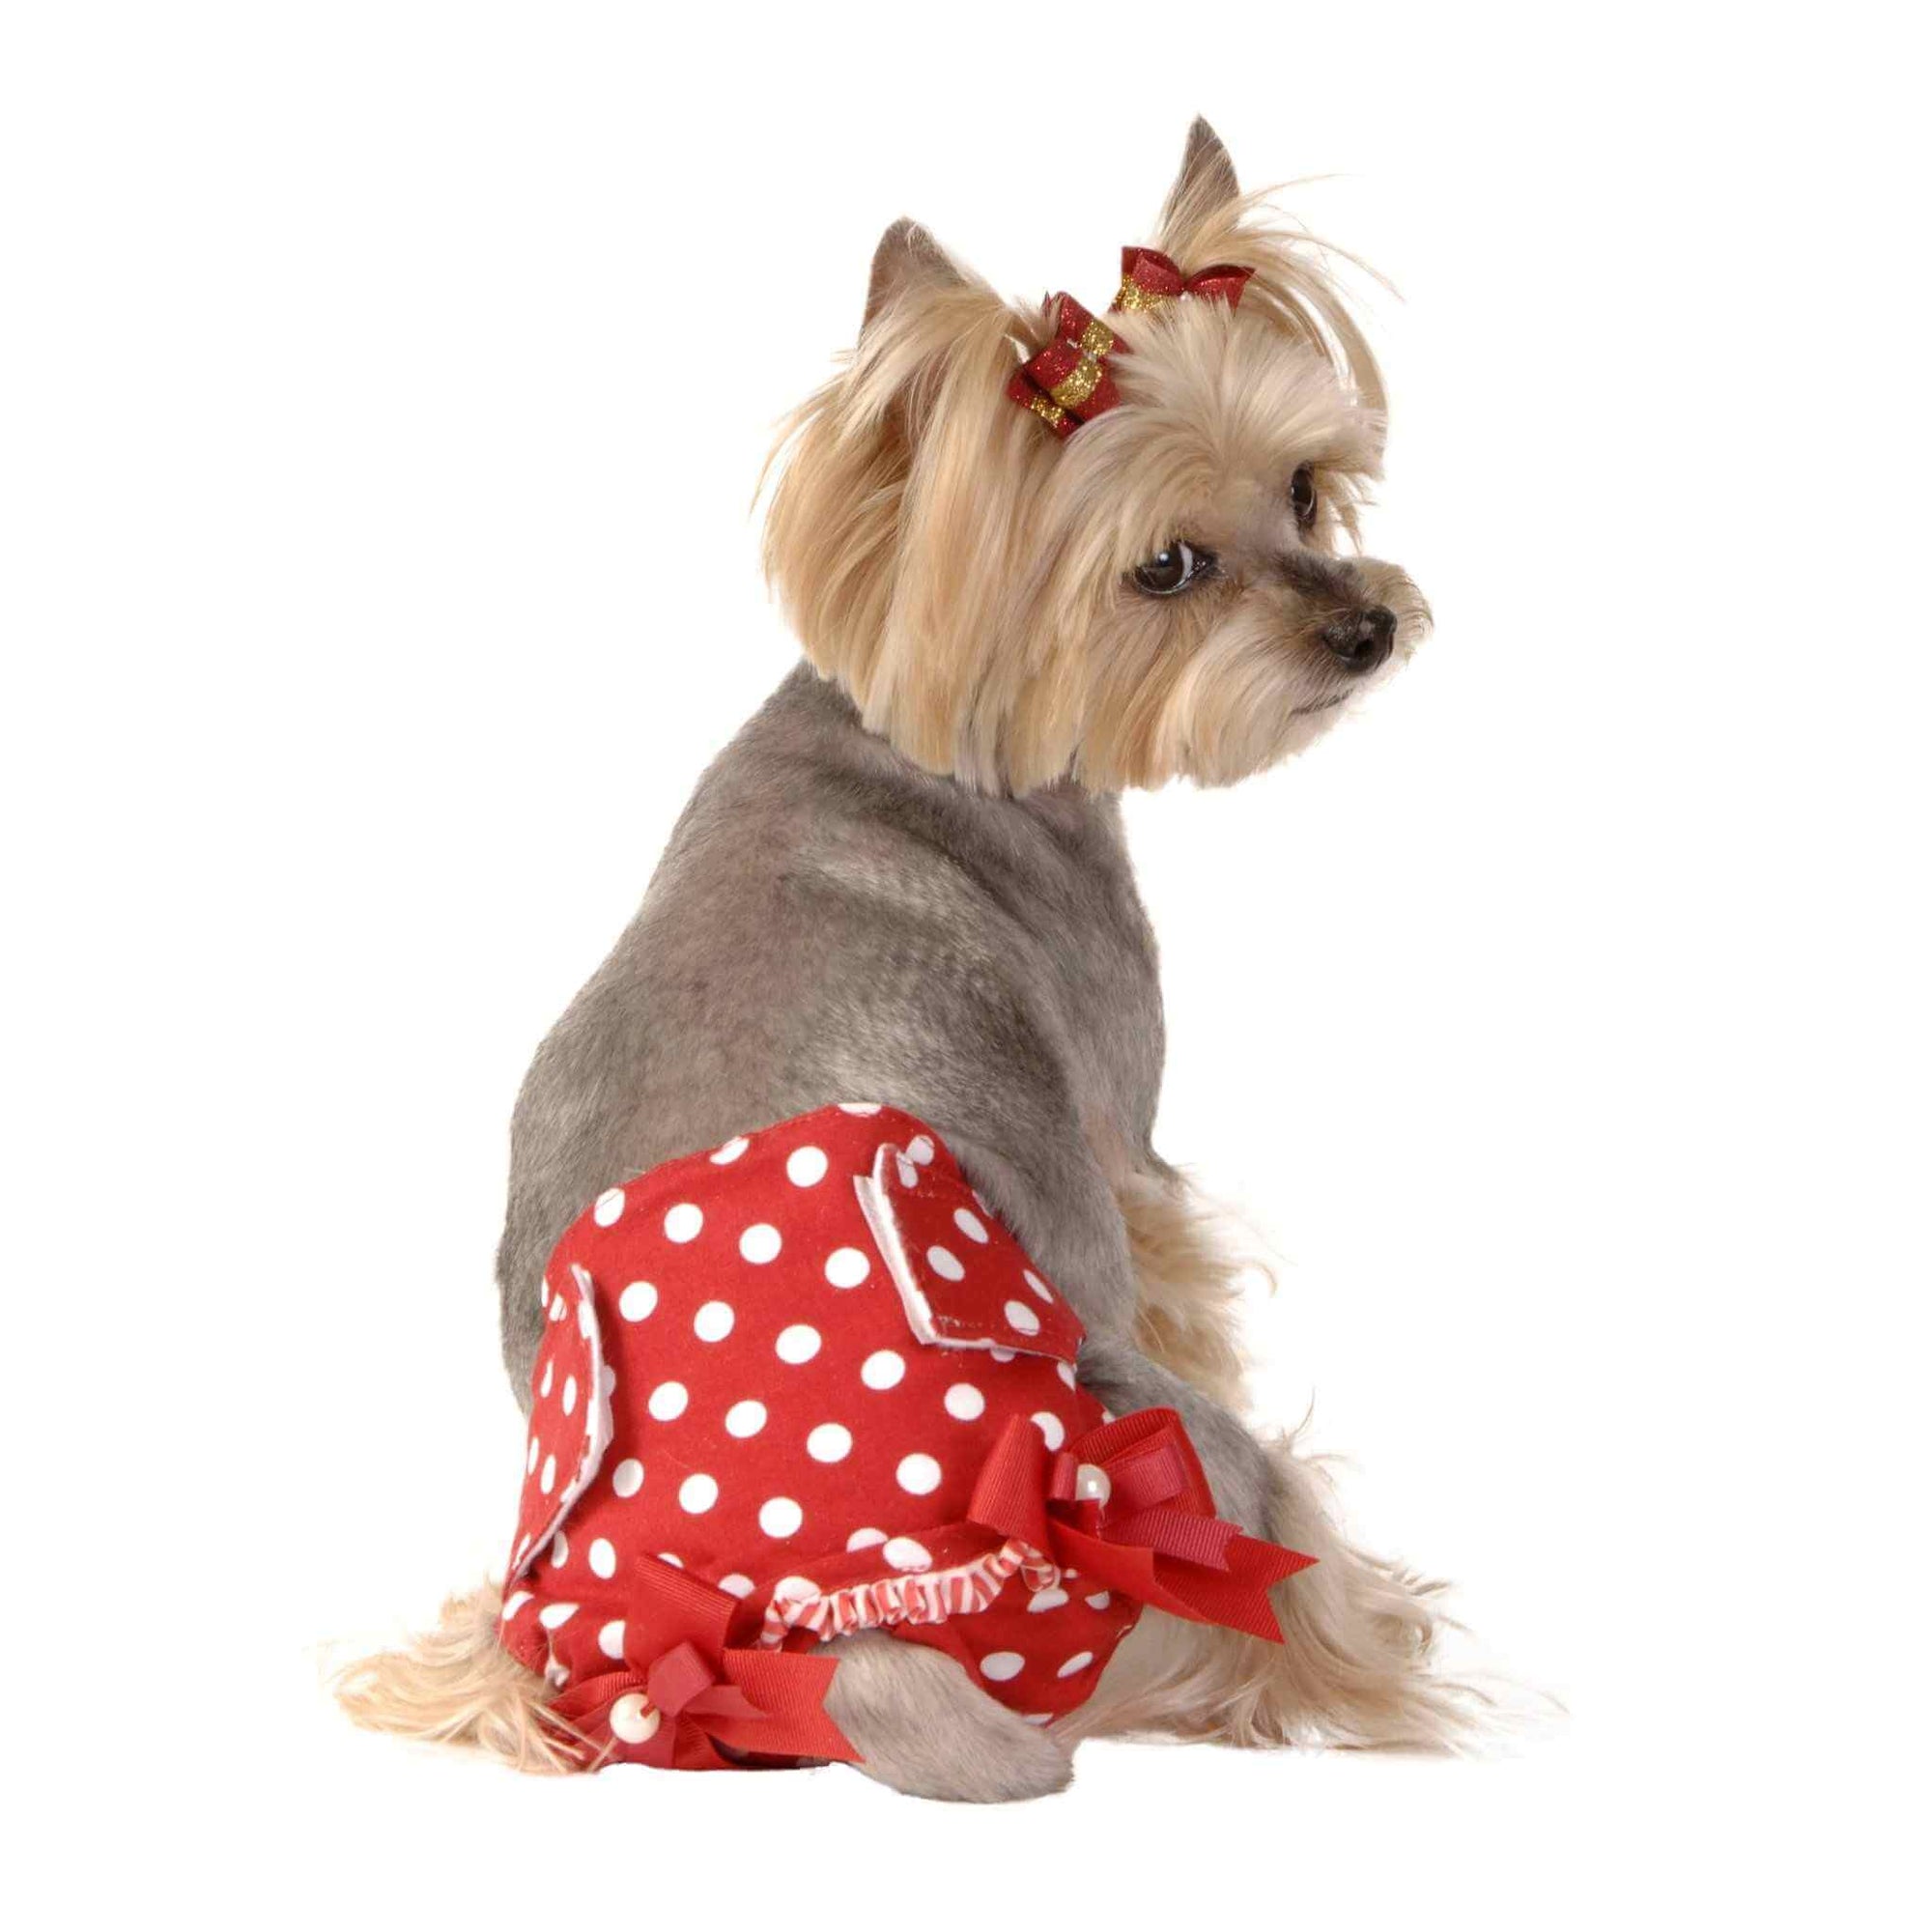 Washable Dog Diapers for Female Dogs - Red Polka Dots - back view